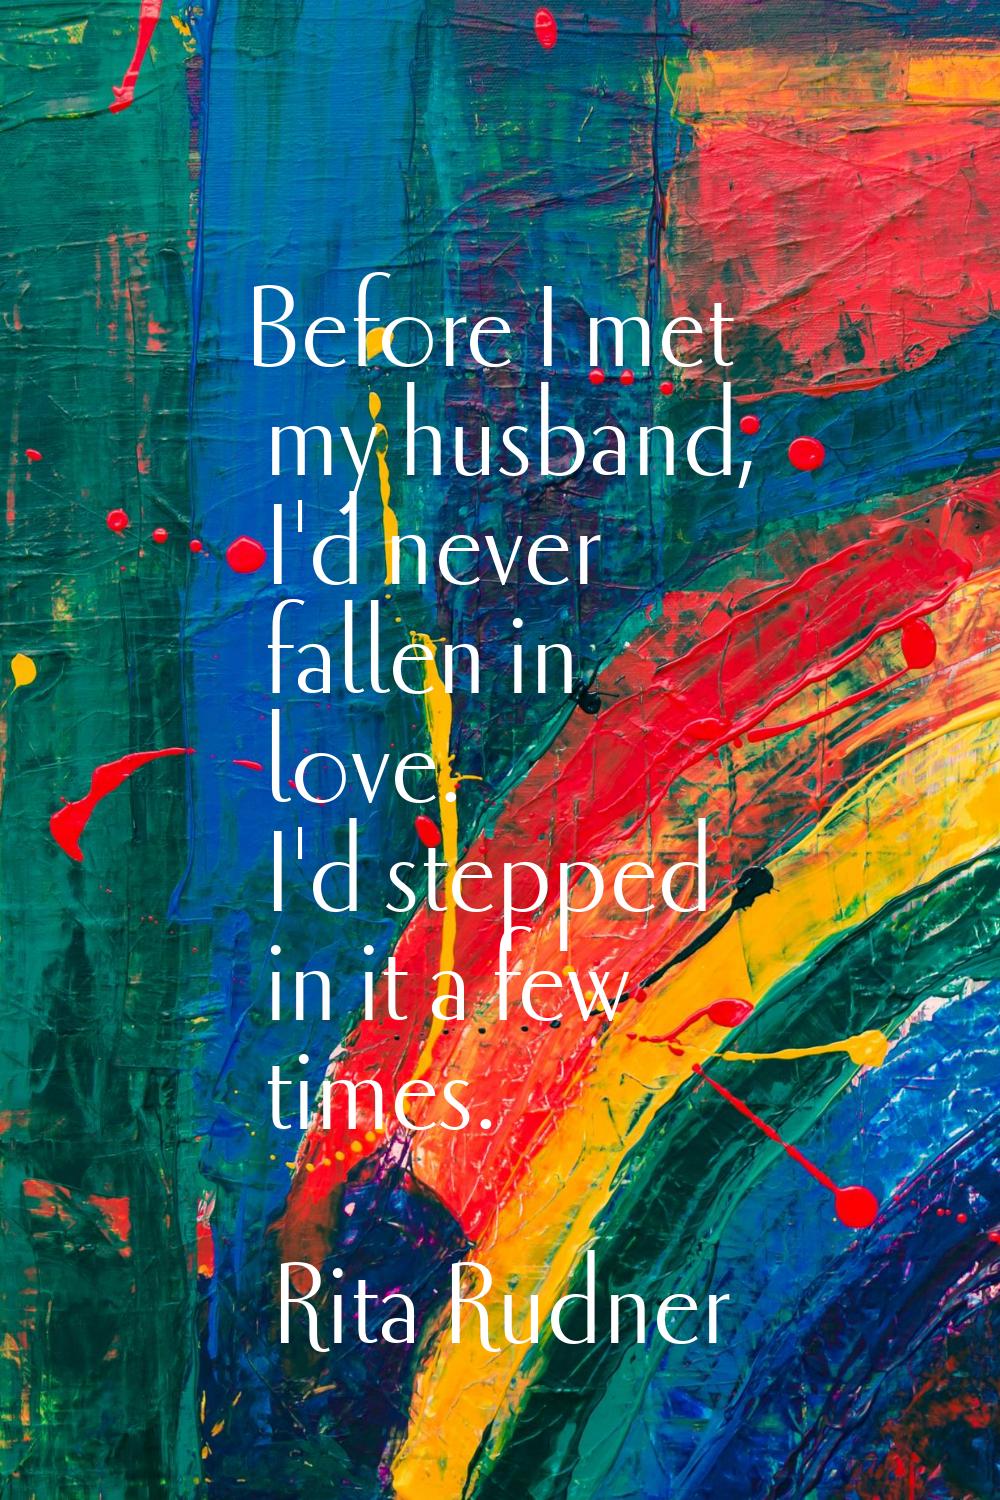 Before I met my husband, I'd never fallen in love. I'd stepped in it a few times.